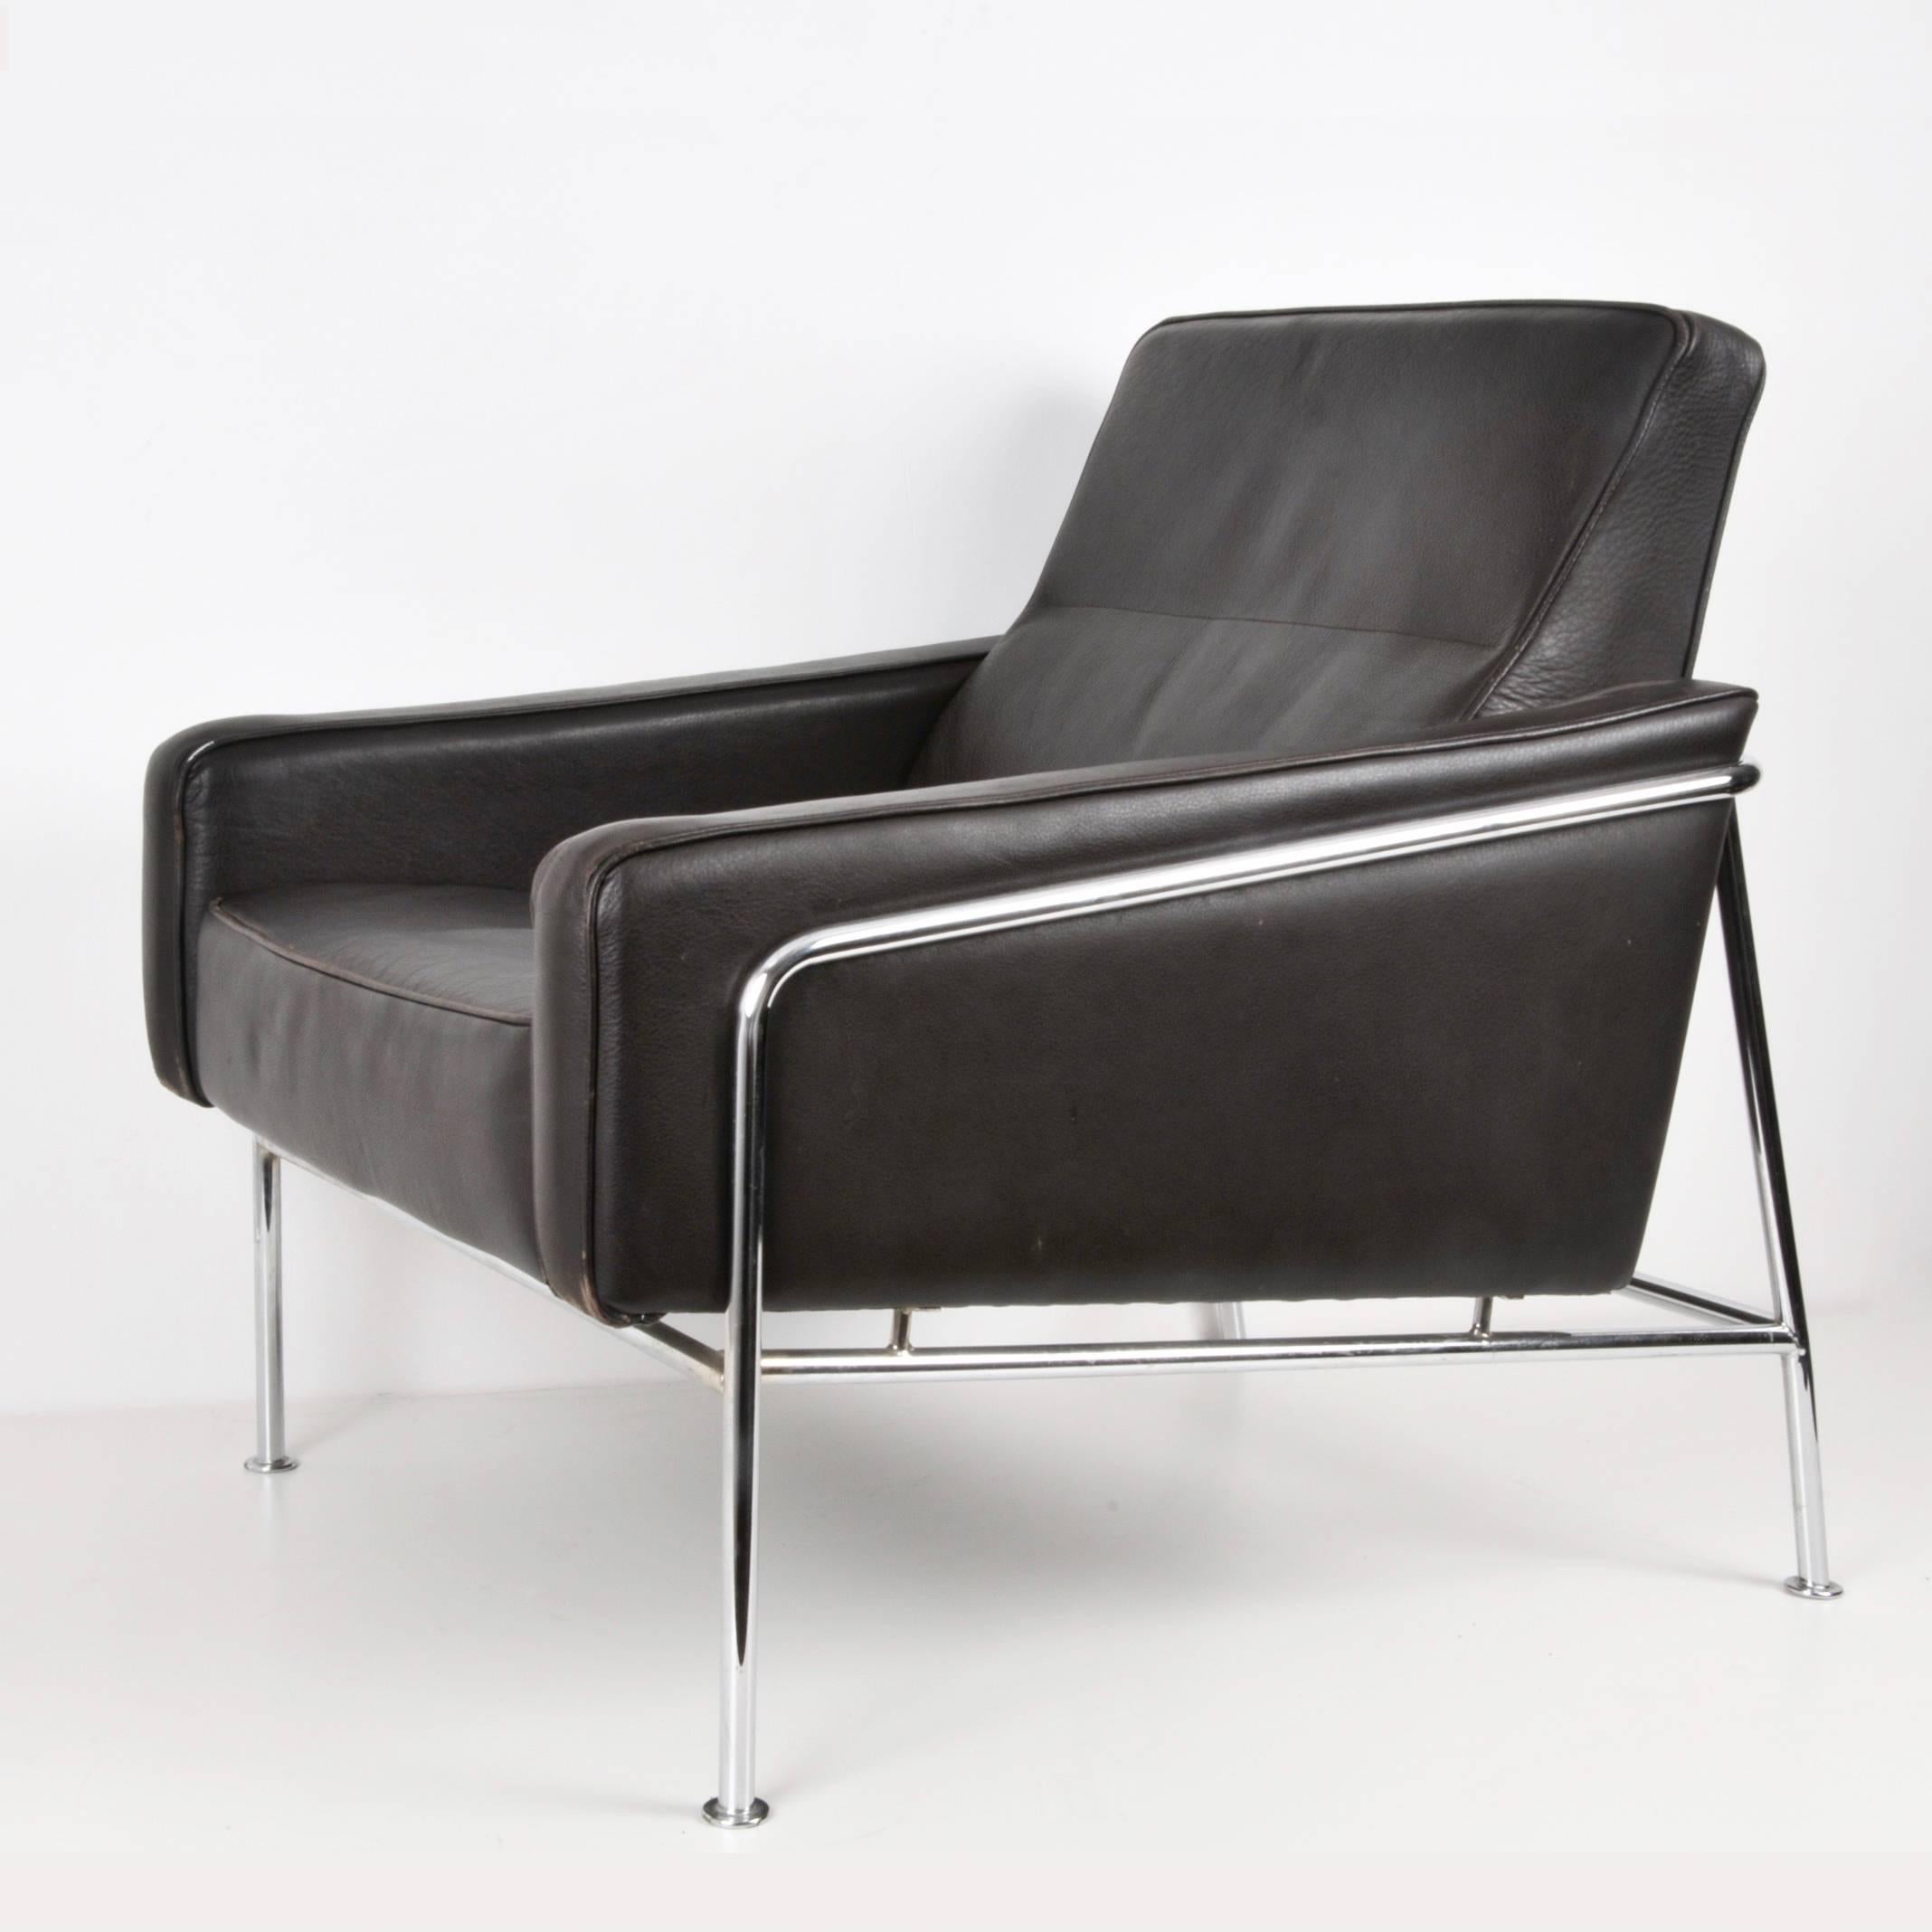 Danish Midcentury Dark Brown Leather Lounge Chair Attributed to Arne Jacobsen, 1956 For Sale